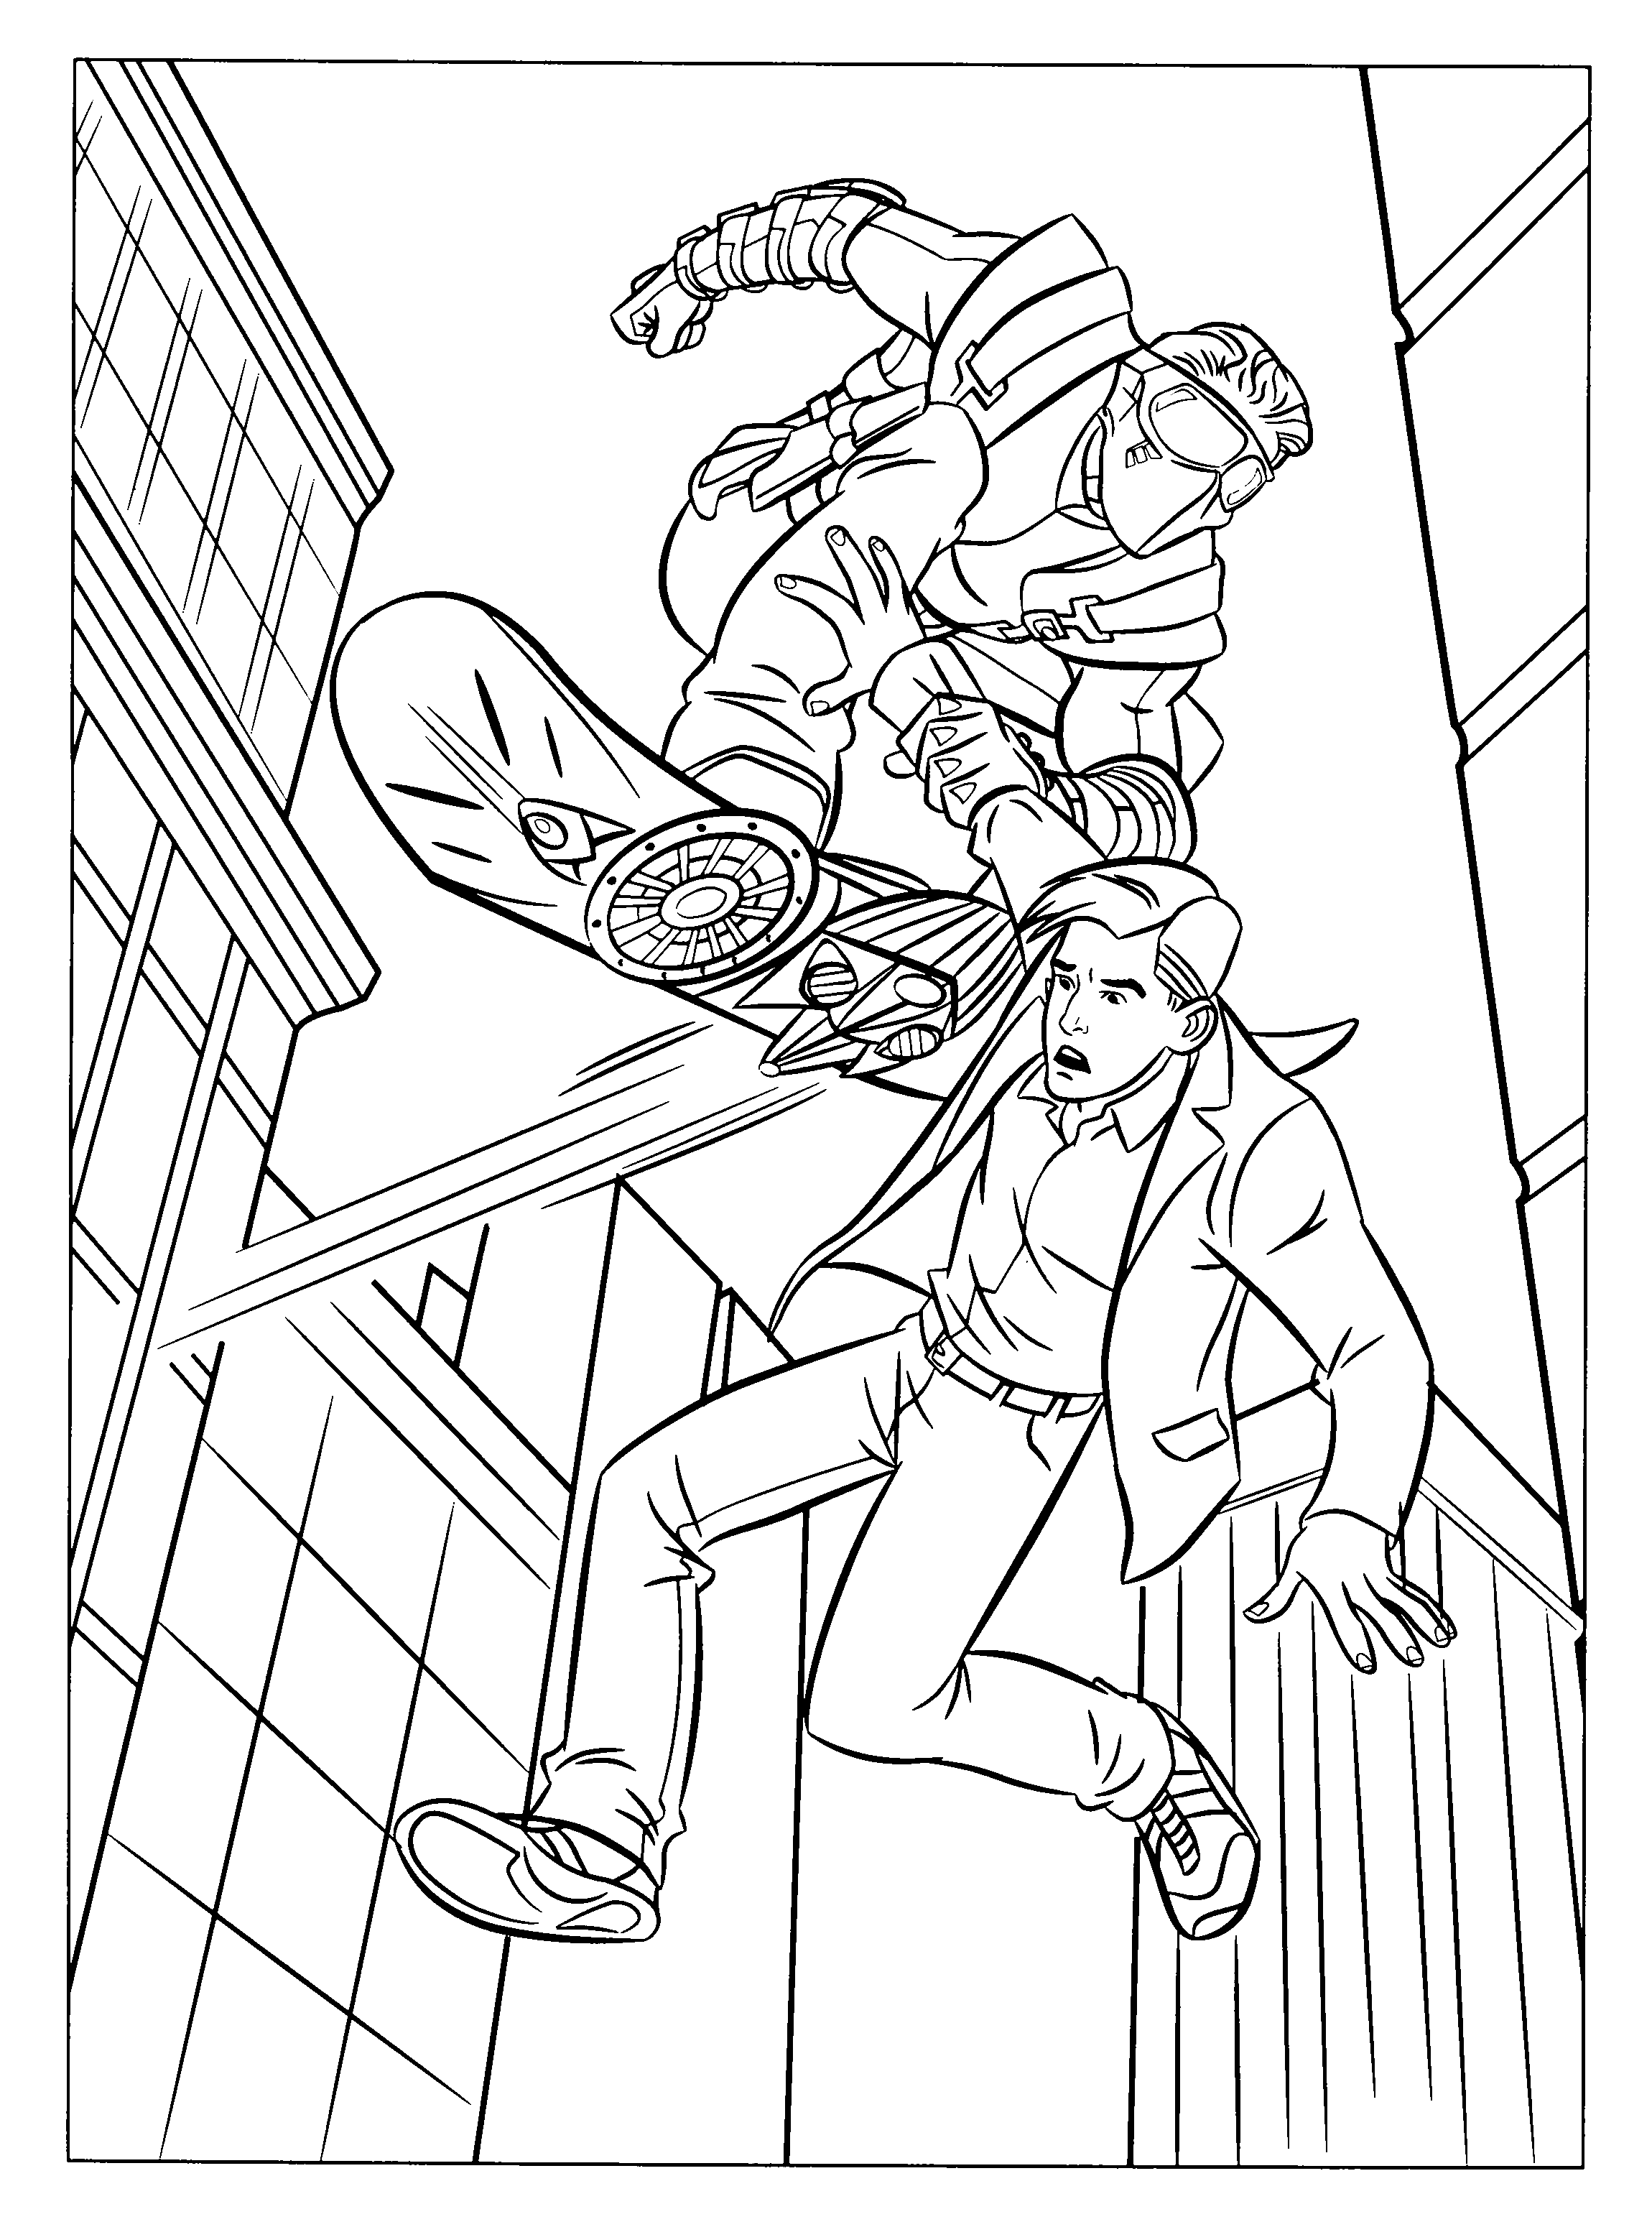 Spiderman Coloring pages | Coloring page | FREE Coloring pages for kids | #5